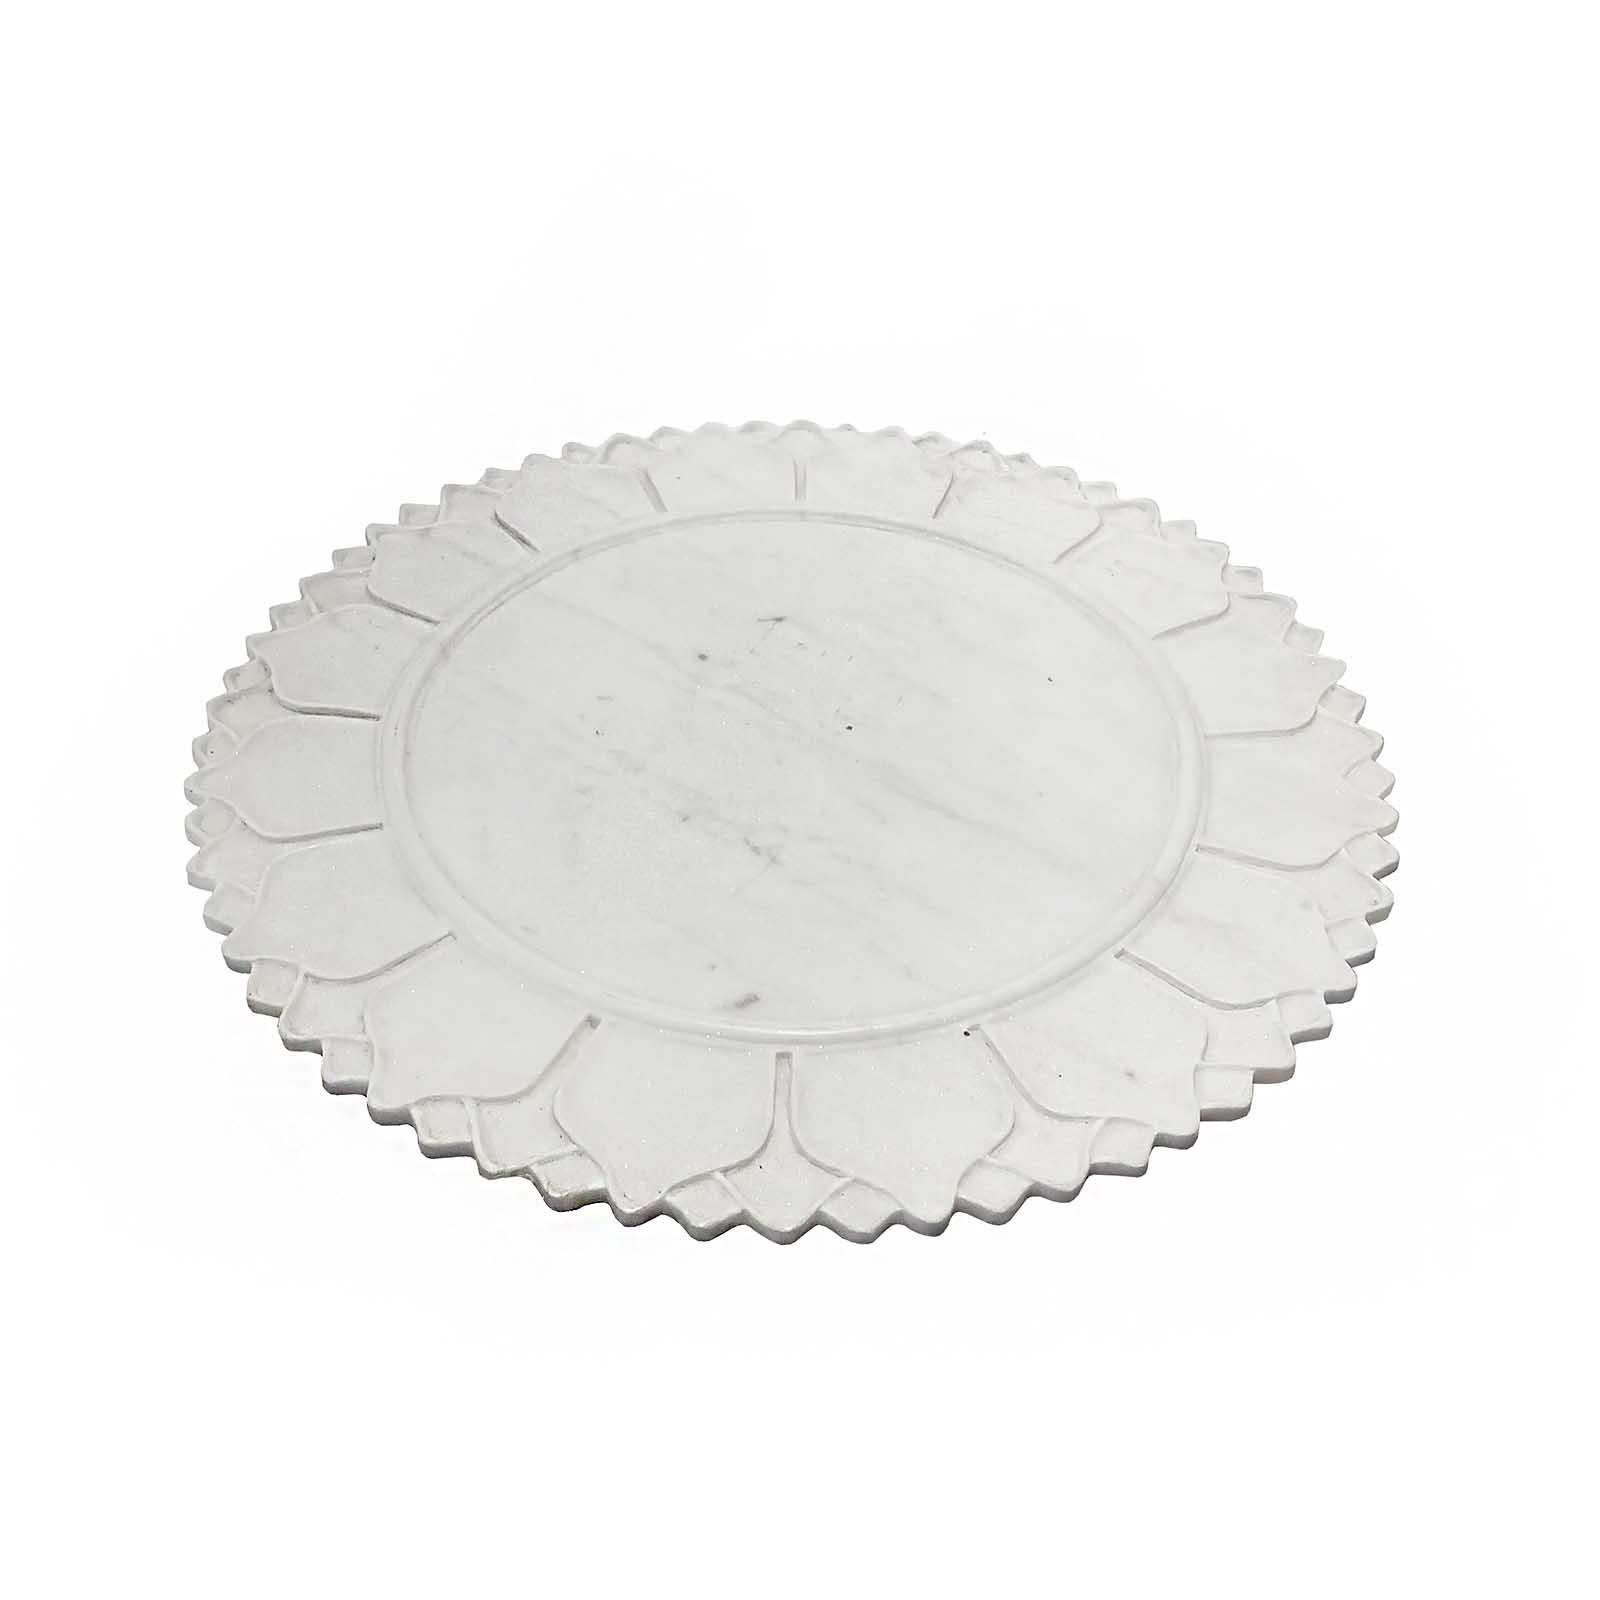 A superb marble charger / server / tray, hand-carved in India, late 1970s. 

Very well preserved. No signs of use, no losses or cracks. Smooth, low-veined white marble, polished and smoothed for a beautiful shiny appearance. 24 inches in diameter,